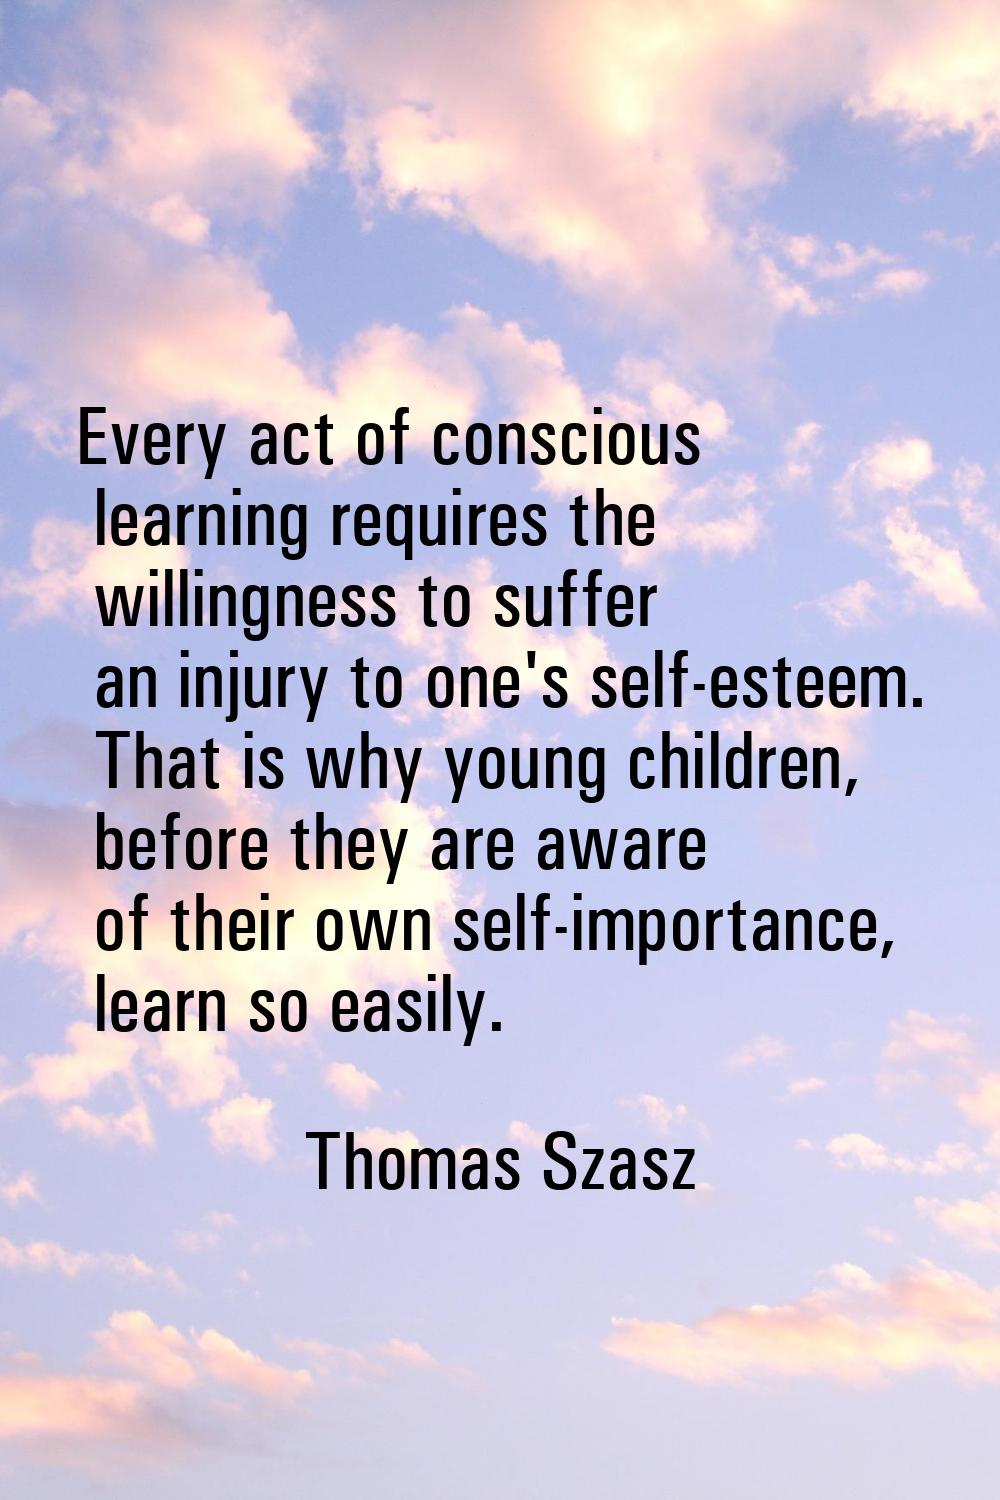 Every act of conscious learning requires the willingness to suffer an injury to one's self-esteem. 